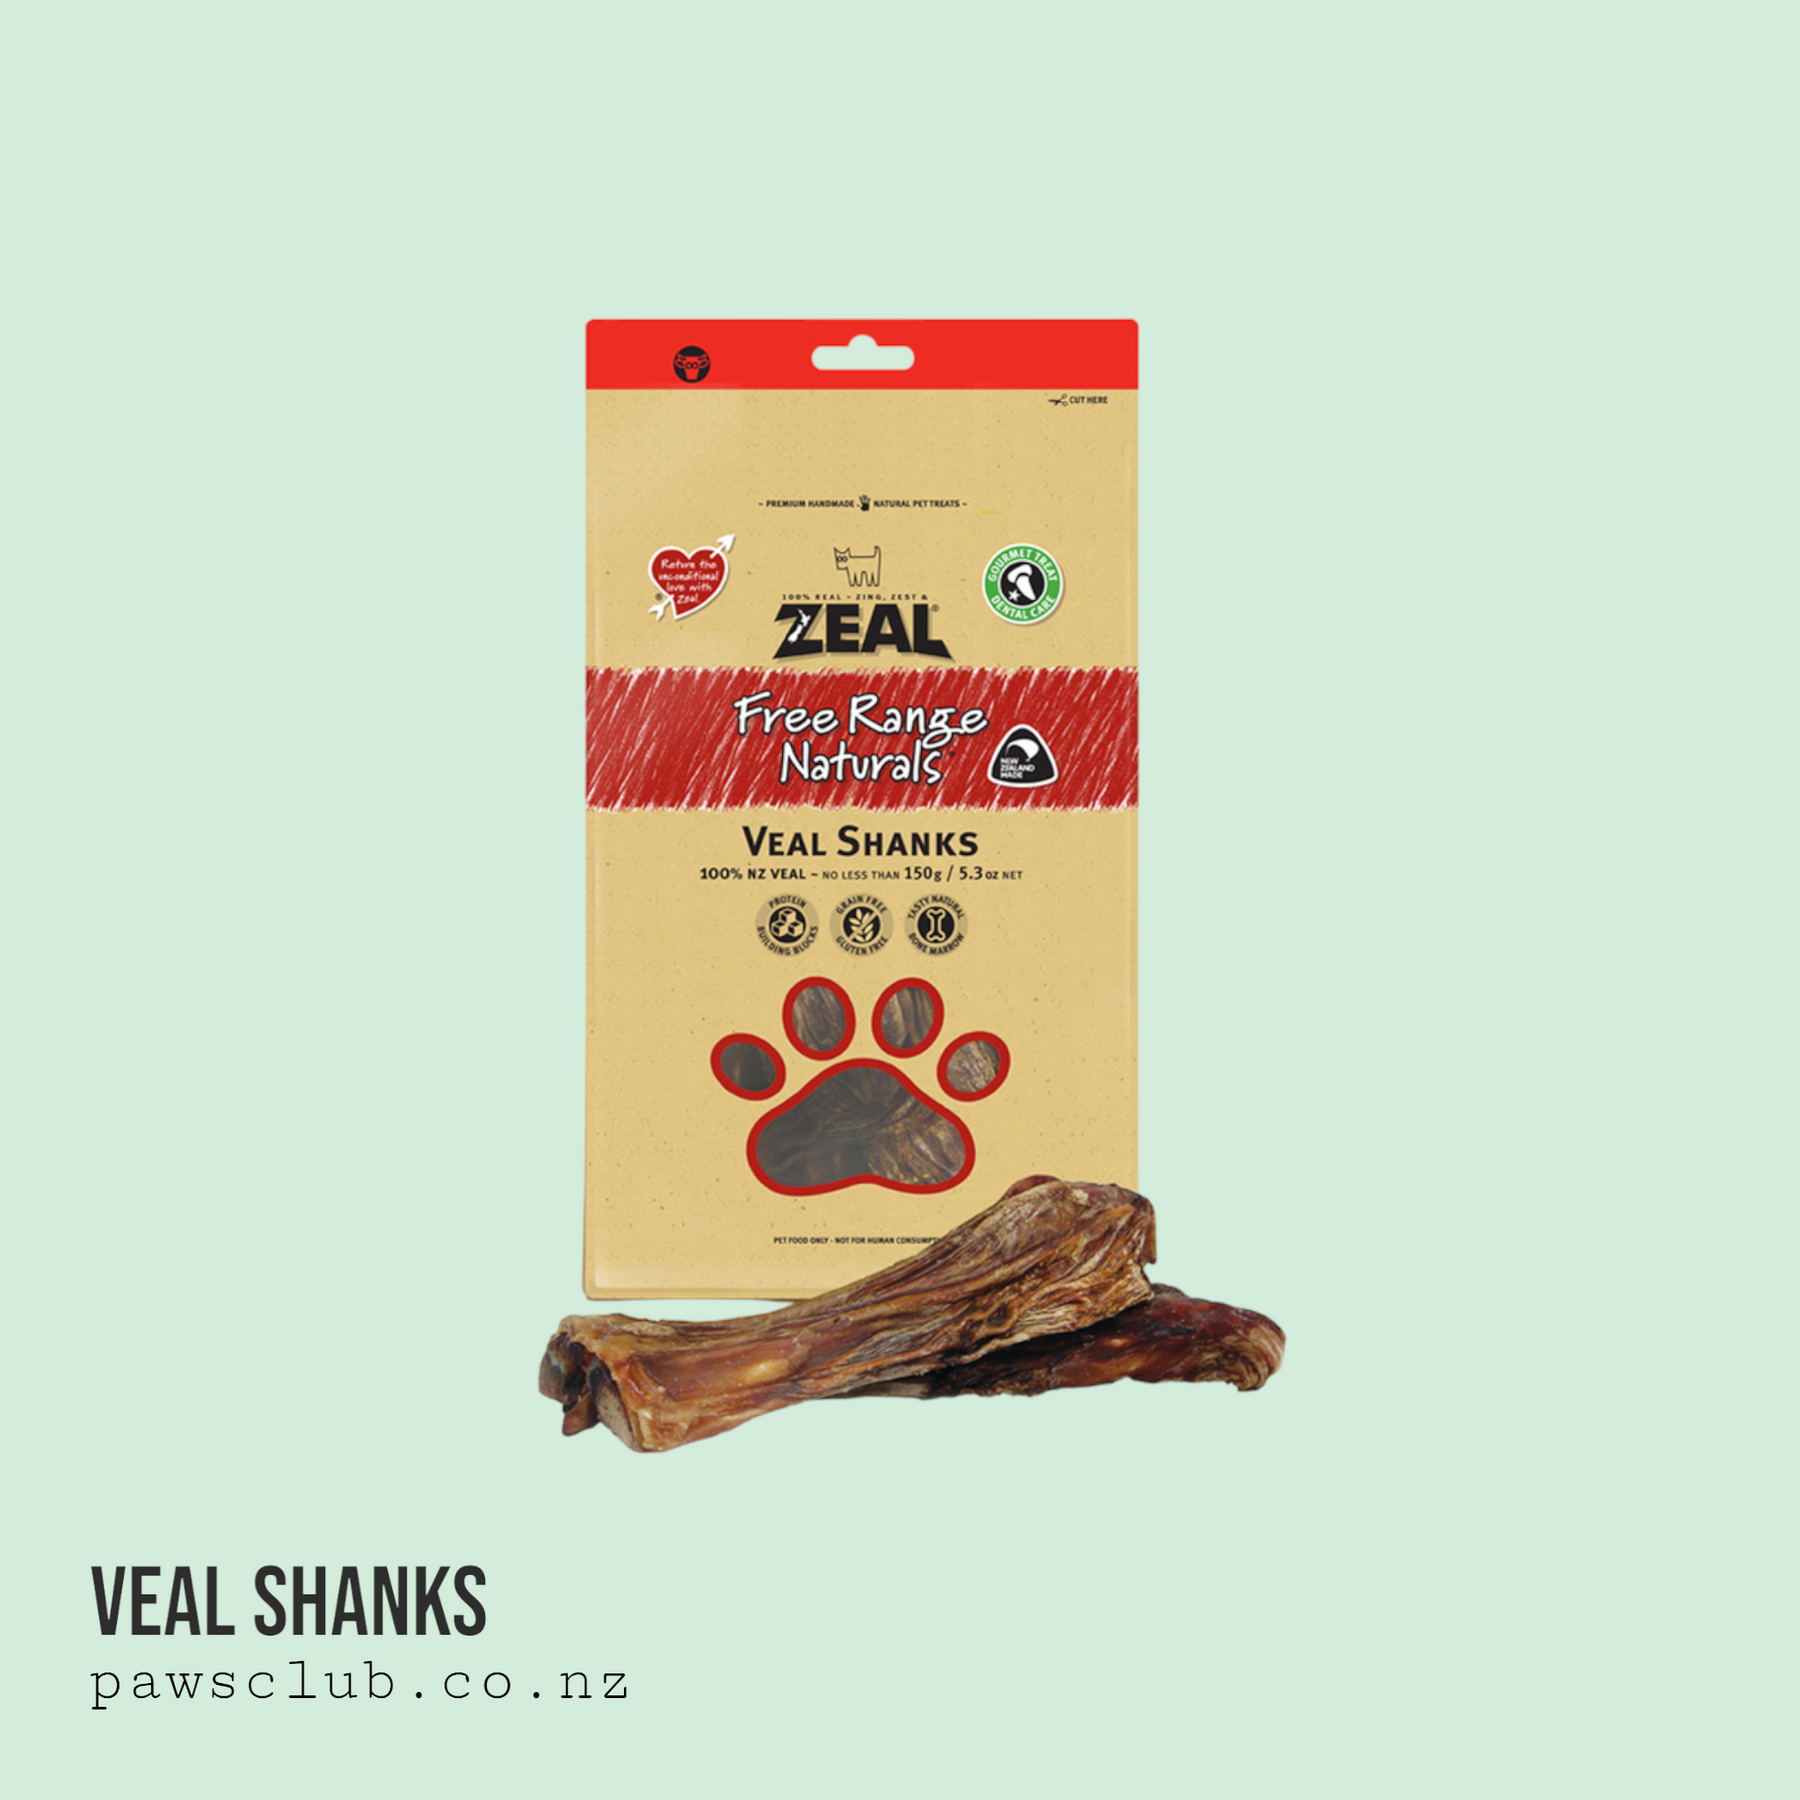 Zeal FREE RANGE Dried Veal Shanks 150g - Long-Lasting Chew for Dogs